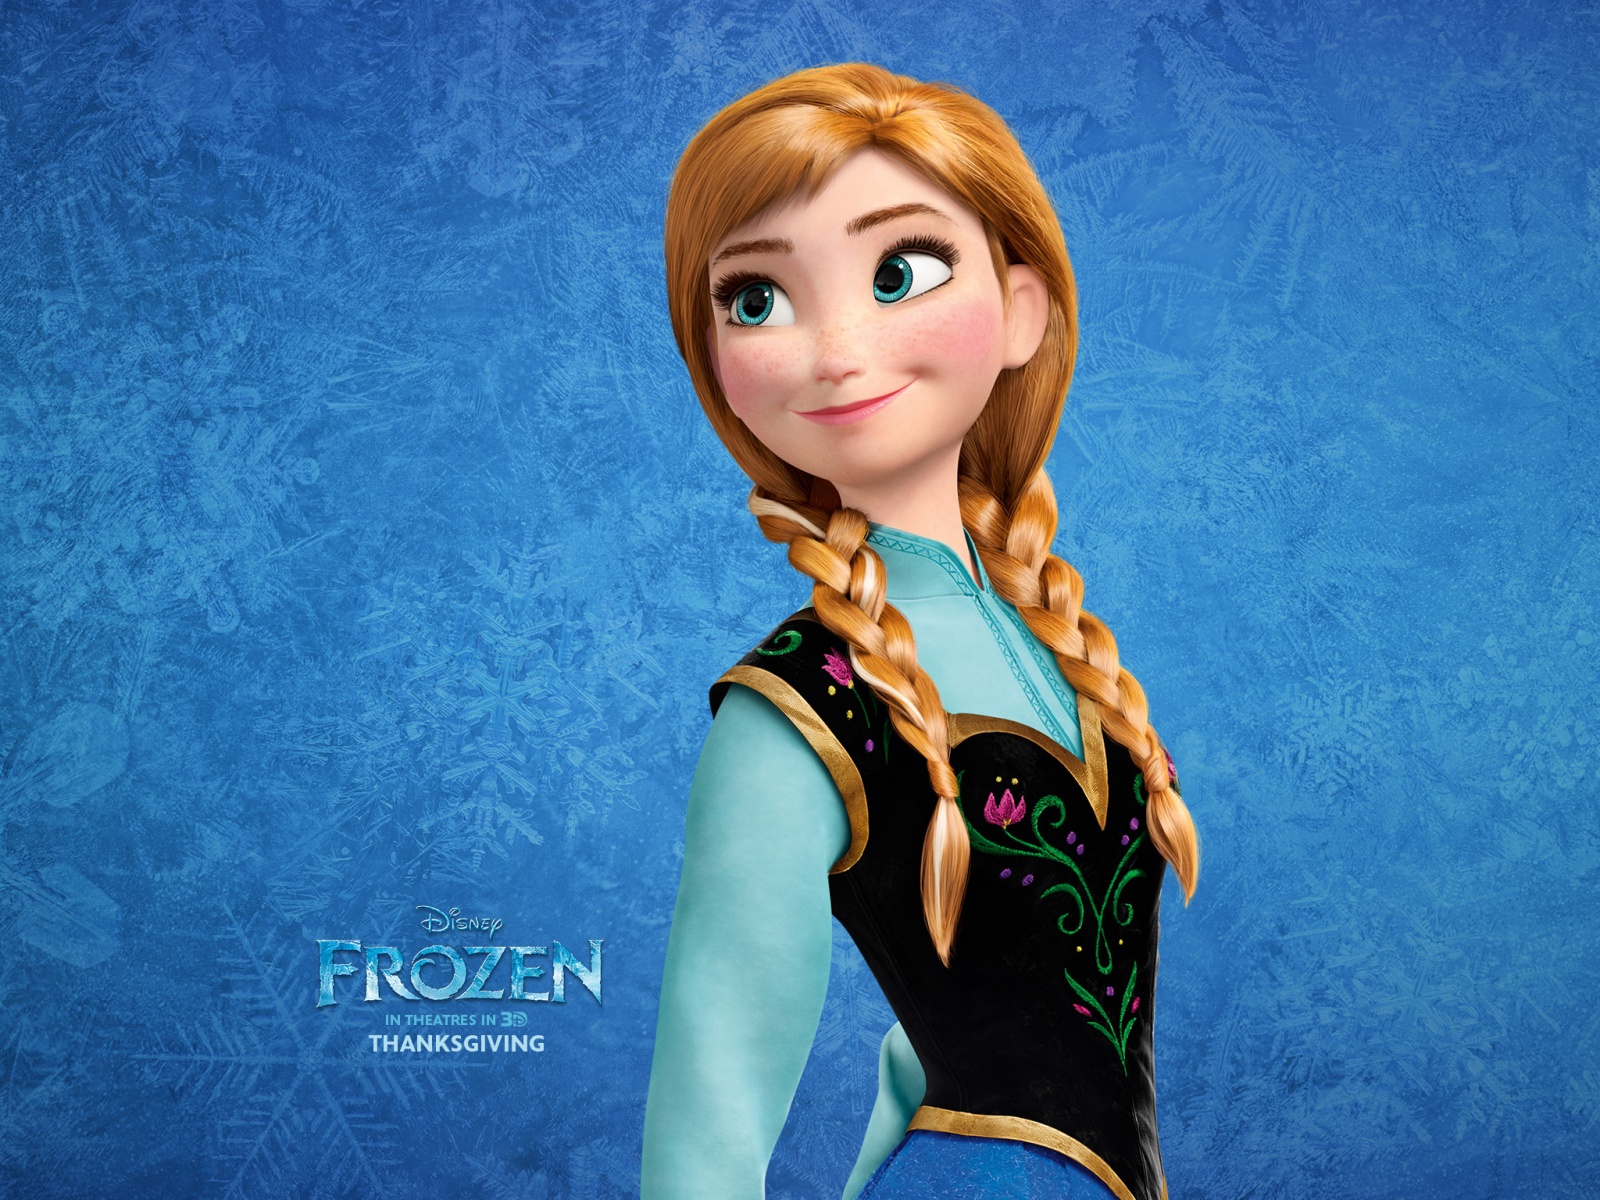 Princess Anna Frozen Wallpapers In Jpg Format For Free Download